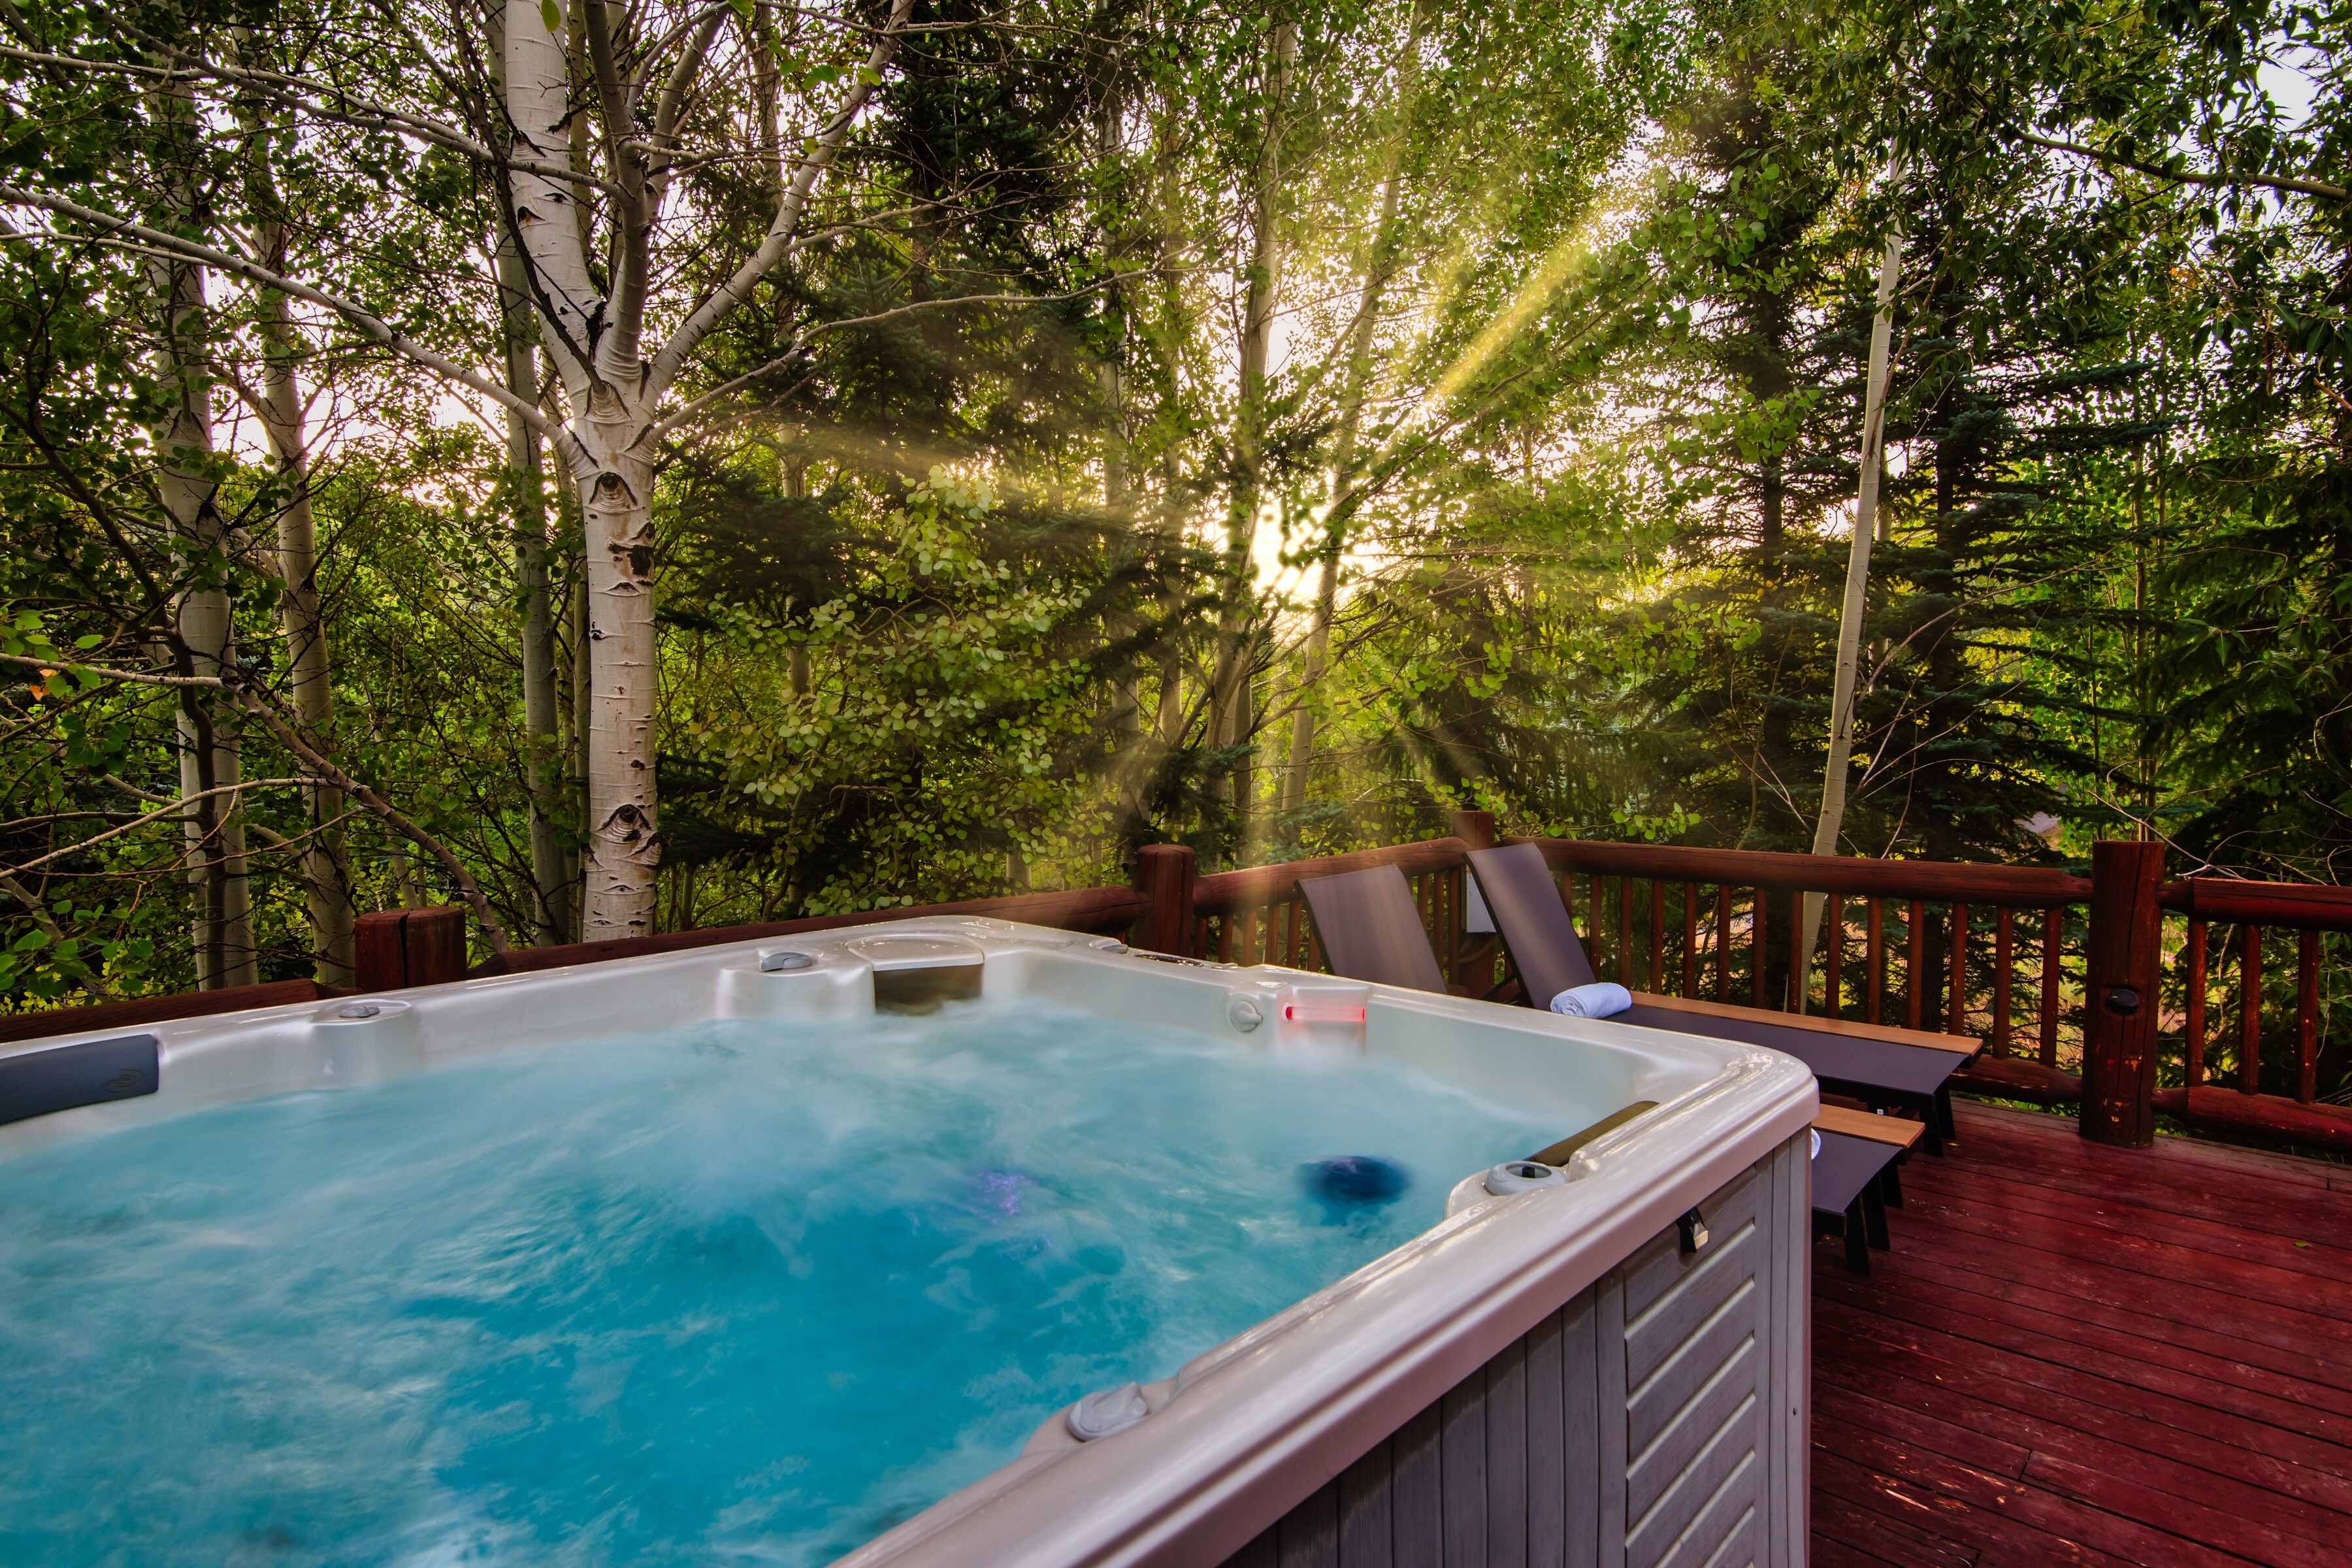 Take a dip in the jacuzzi and soak up your serene surroundings.